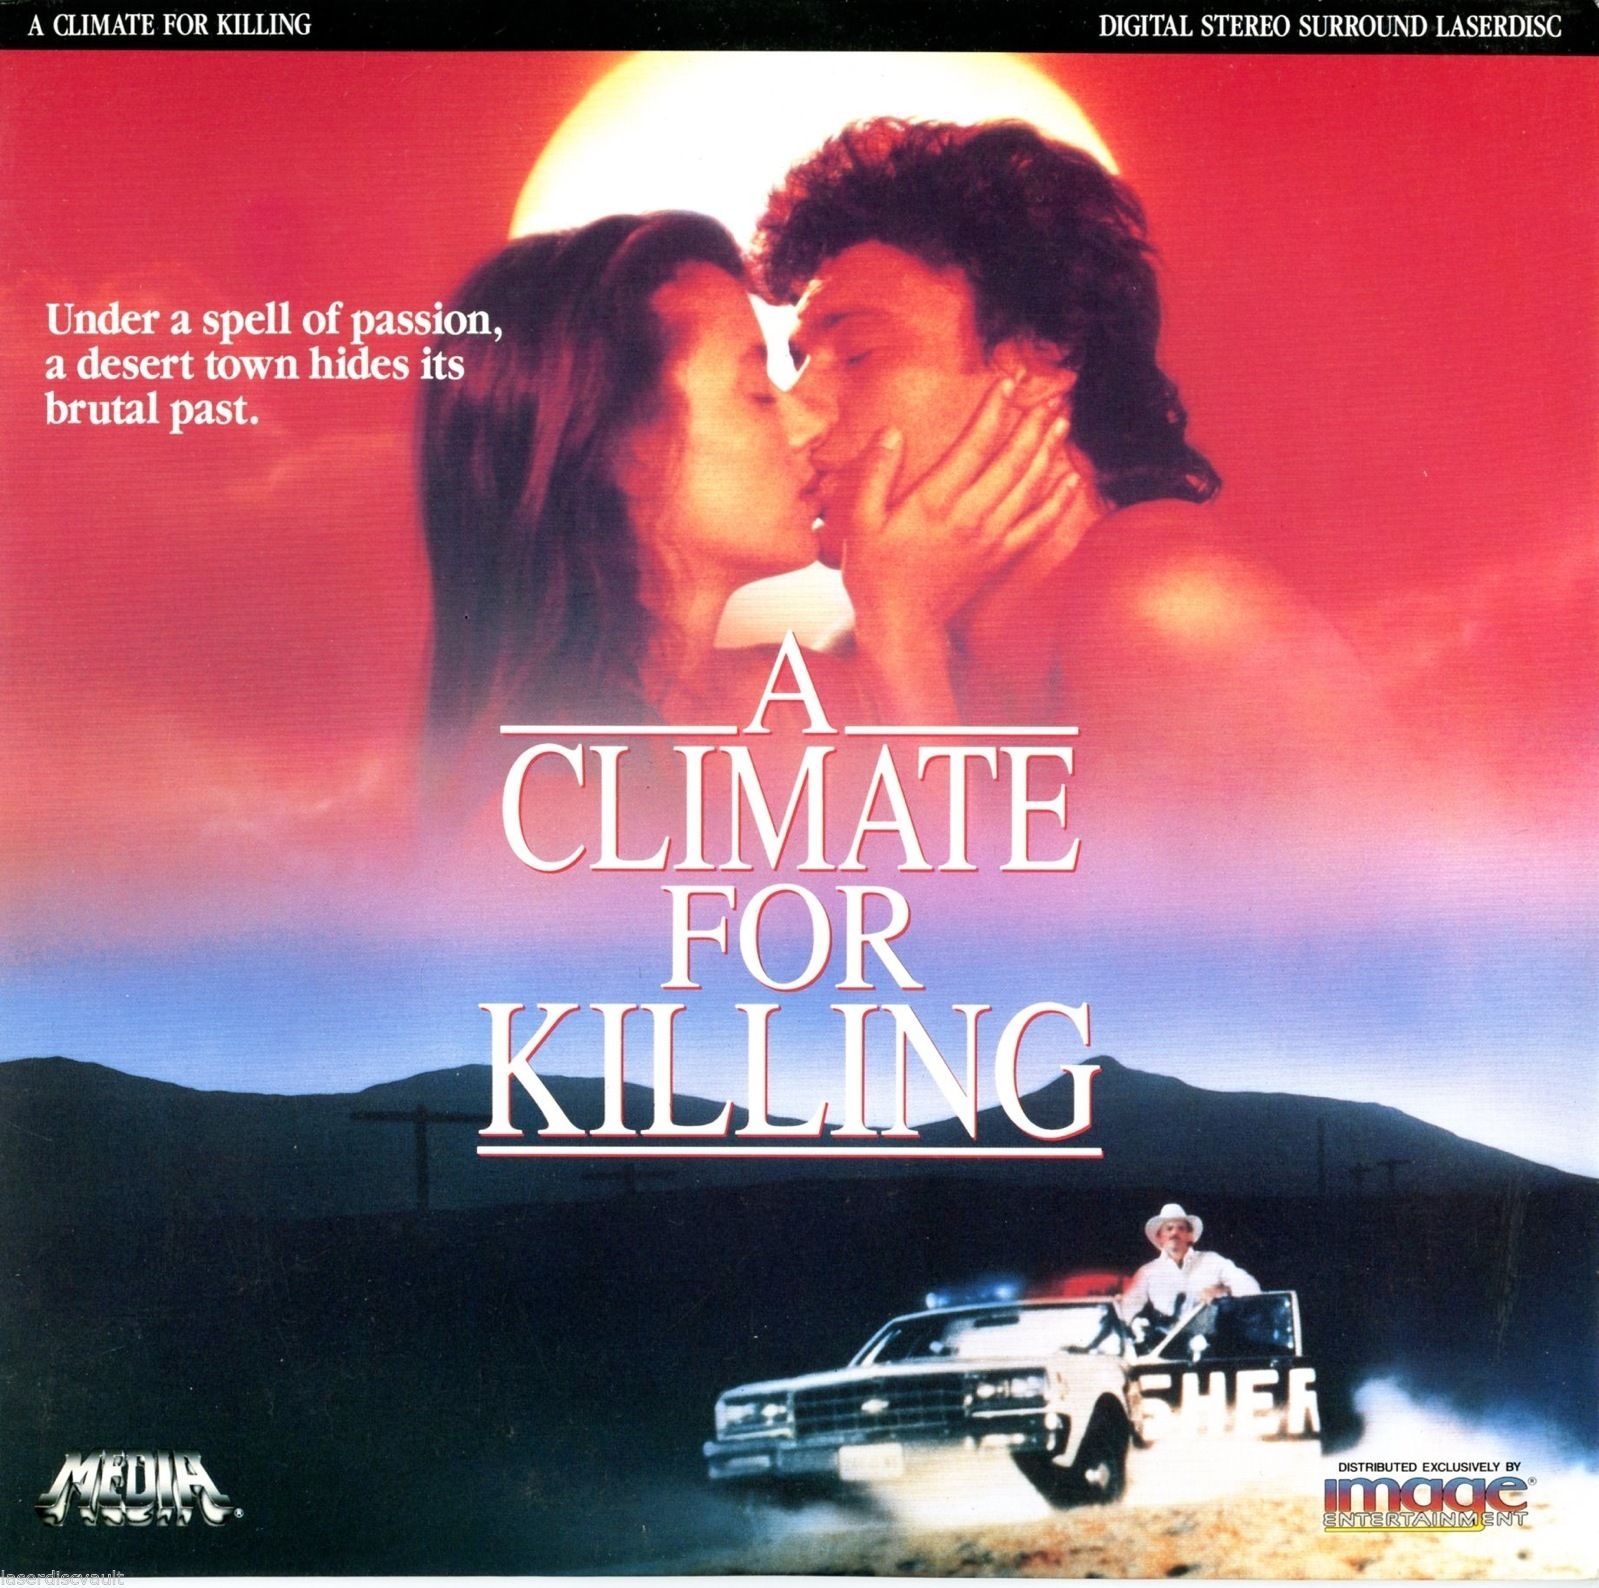 A Climate for Killing (1991) Screenshot 2